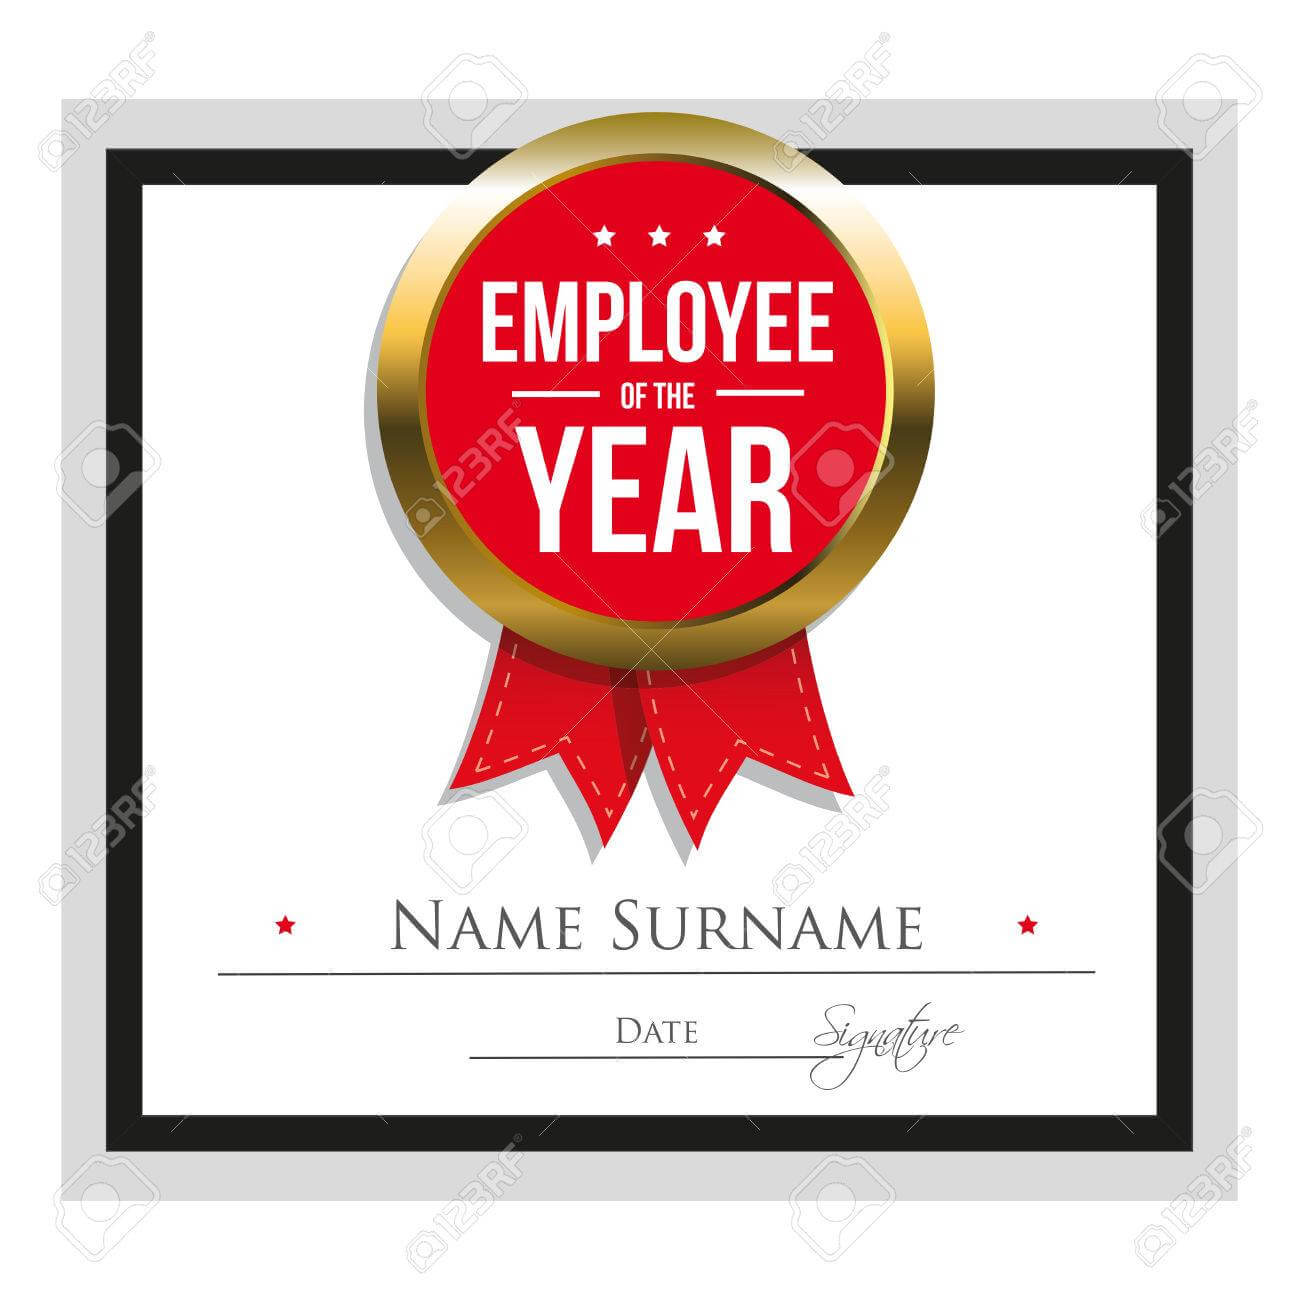 Employee Of The Year Certificate Template Inside Employee Of The Year Certificate Template Free